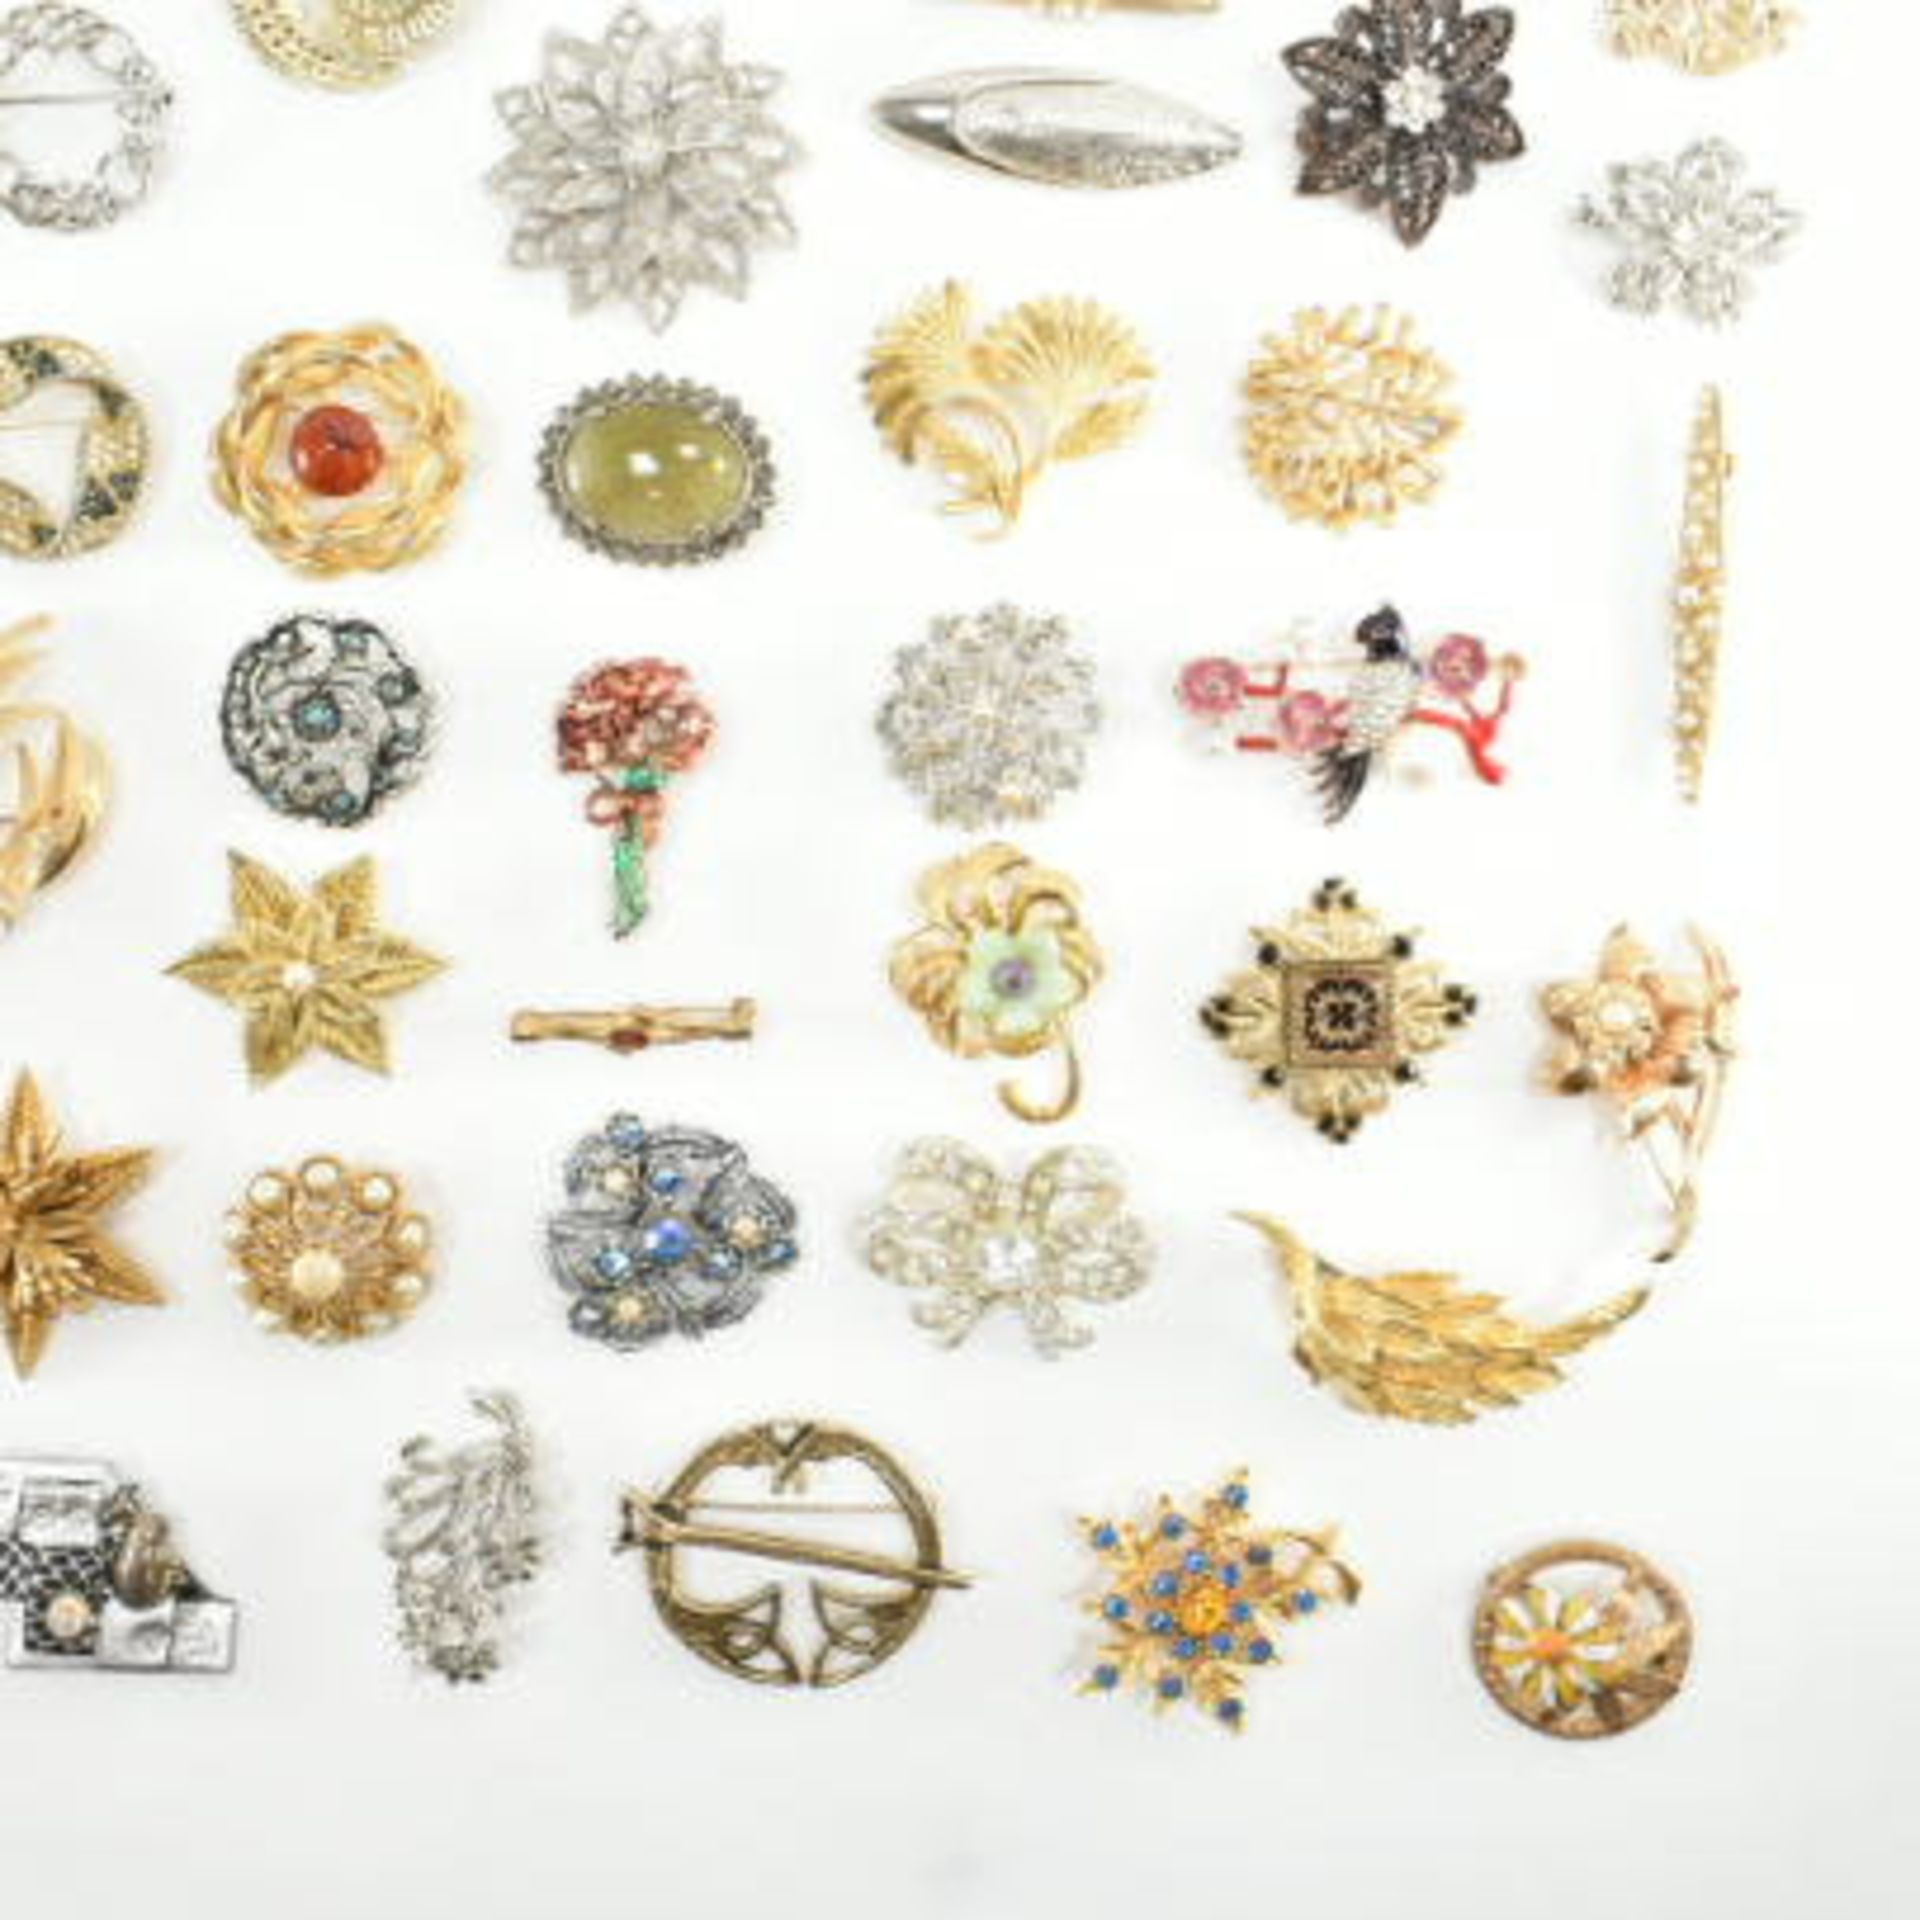 COLLECTION OF ASSORTED COSTUME JEWELLERY BROOCH PINS - Image 2 of 8